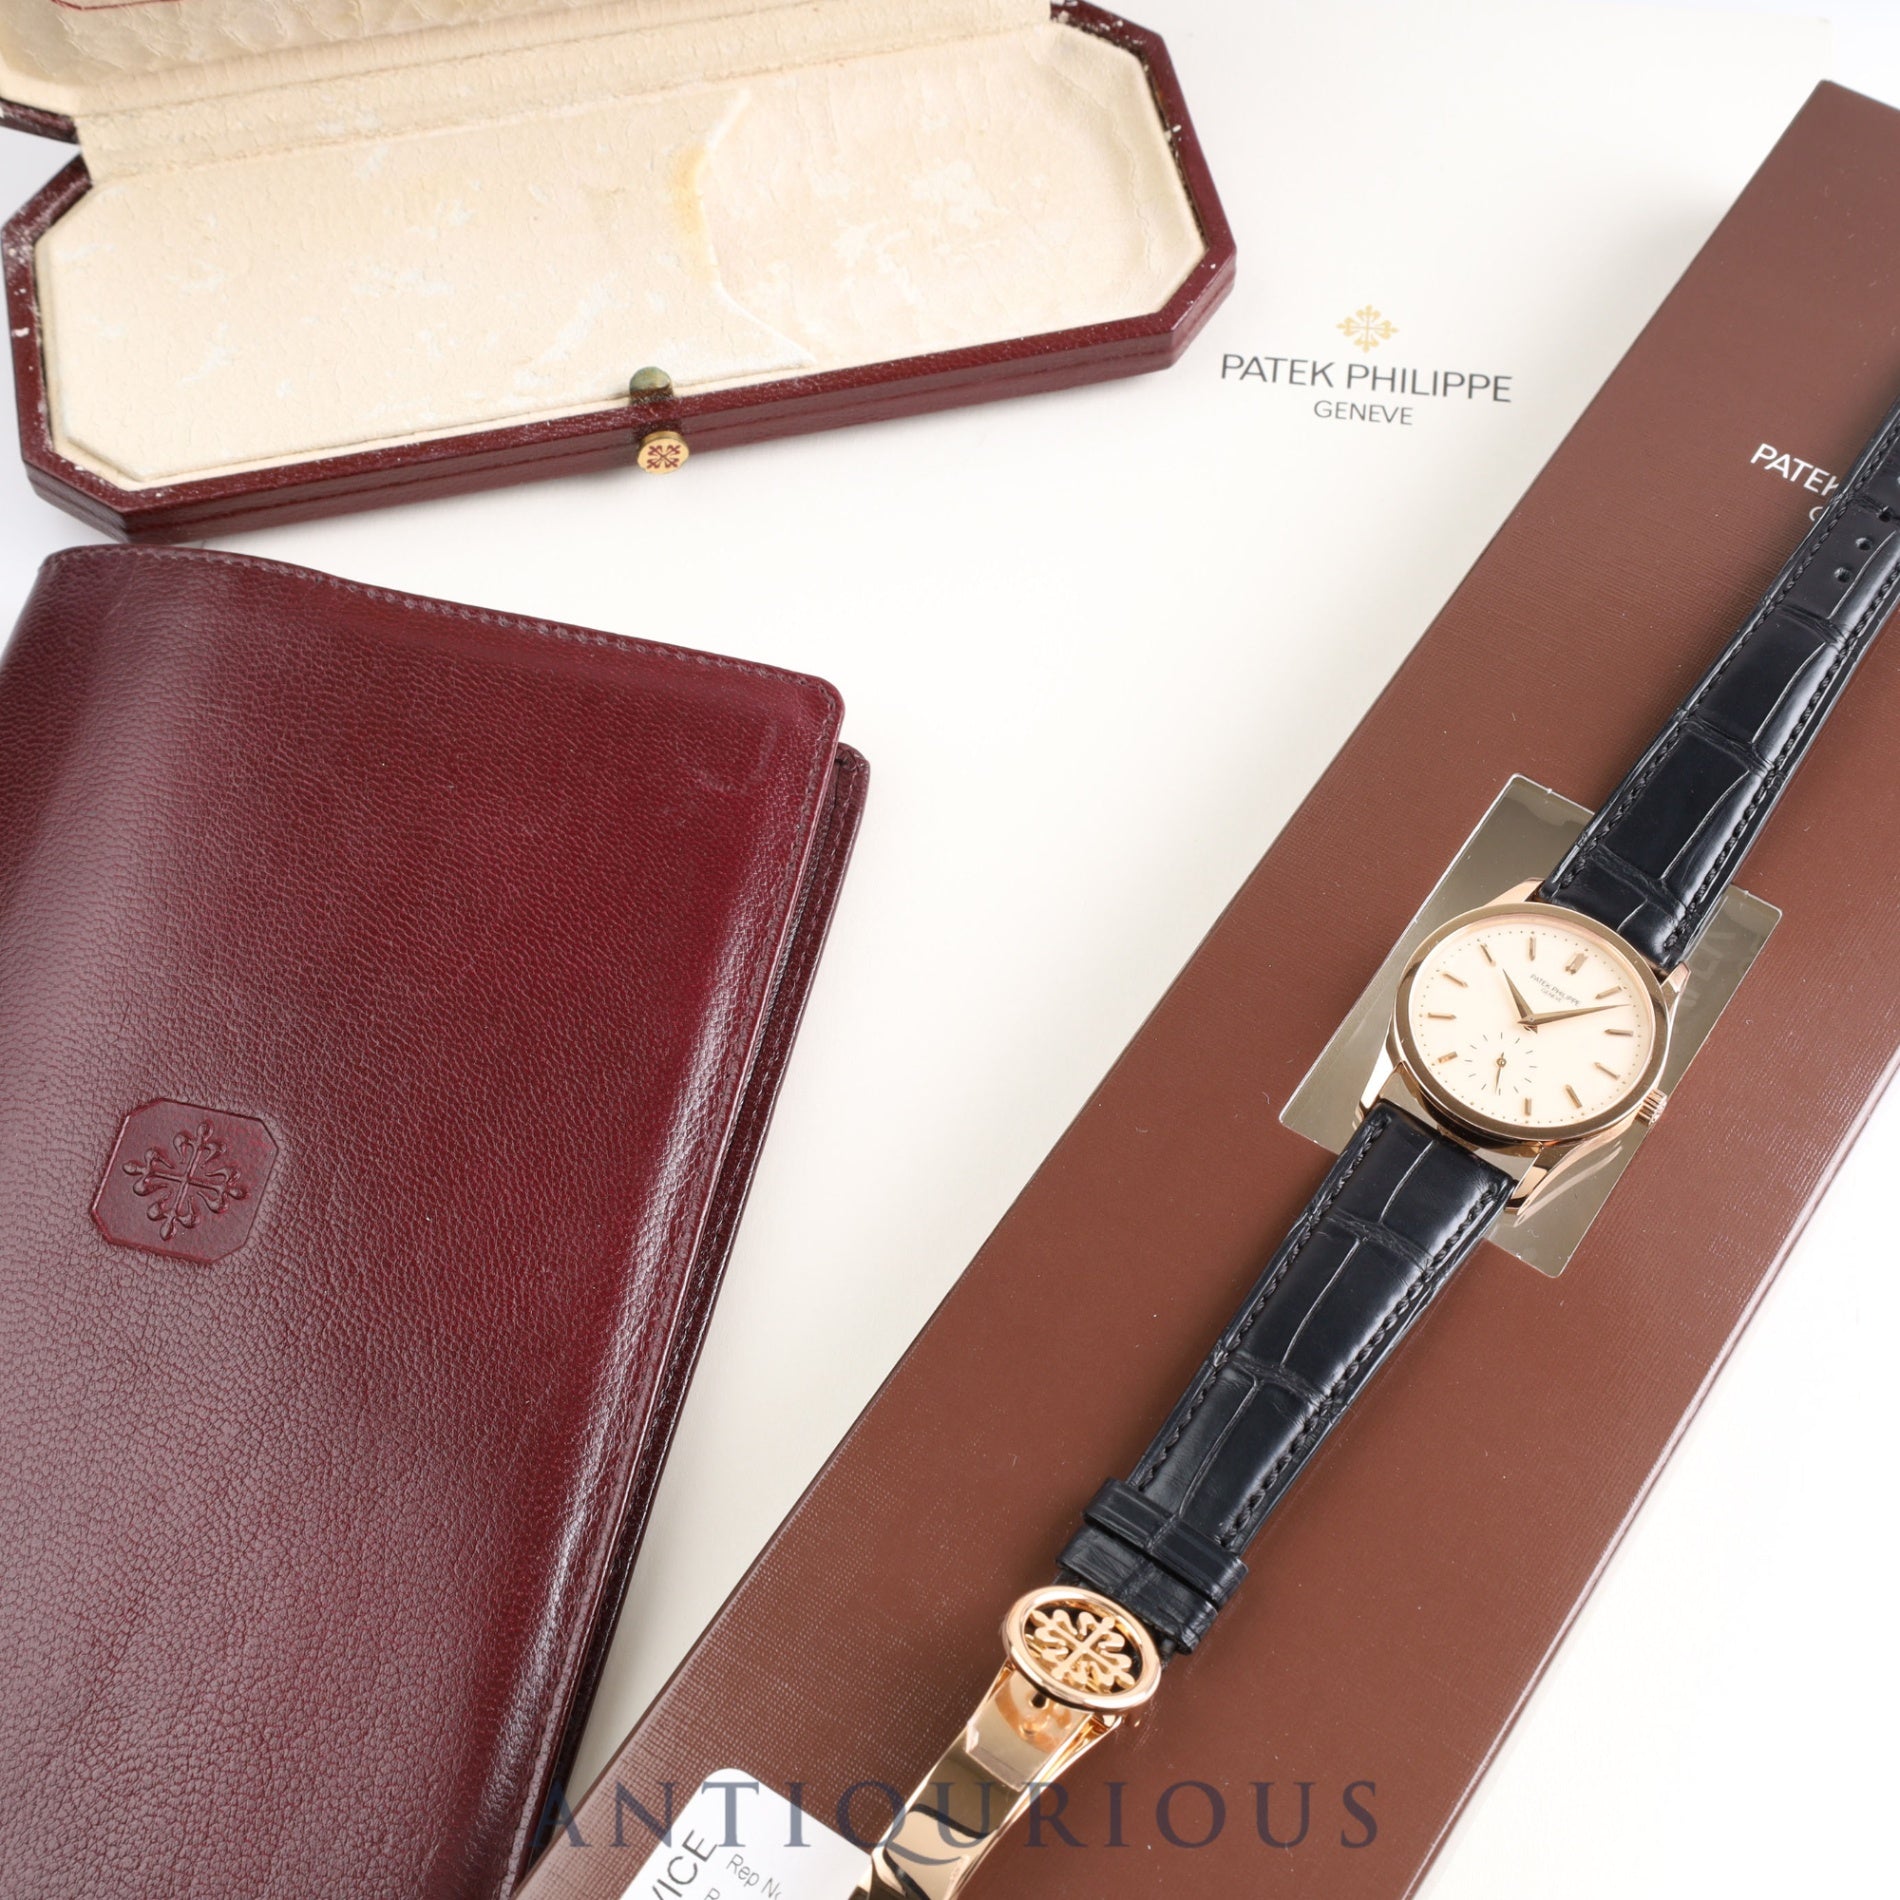 PATEK PHILIPPE CALATRAVA 3796 Manual winding Cal.215 RG Leather Ivory dial Genuine buckle Box Archive booklet *Overhauled by Patek Philippe on March 1, 2022